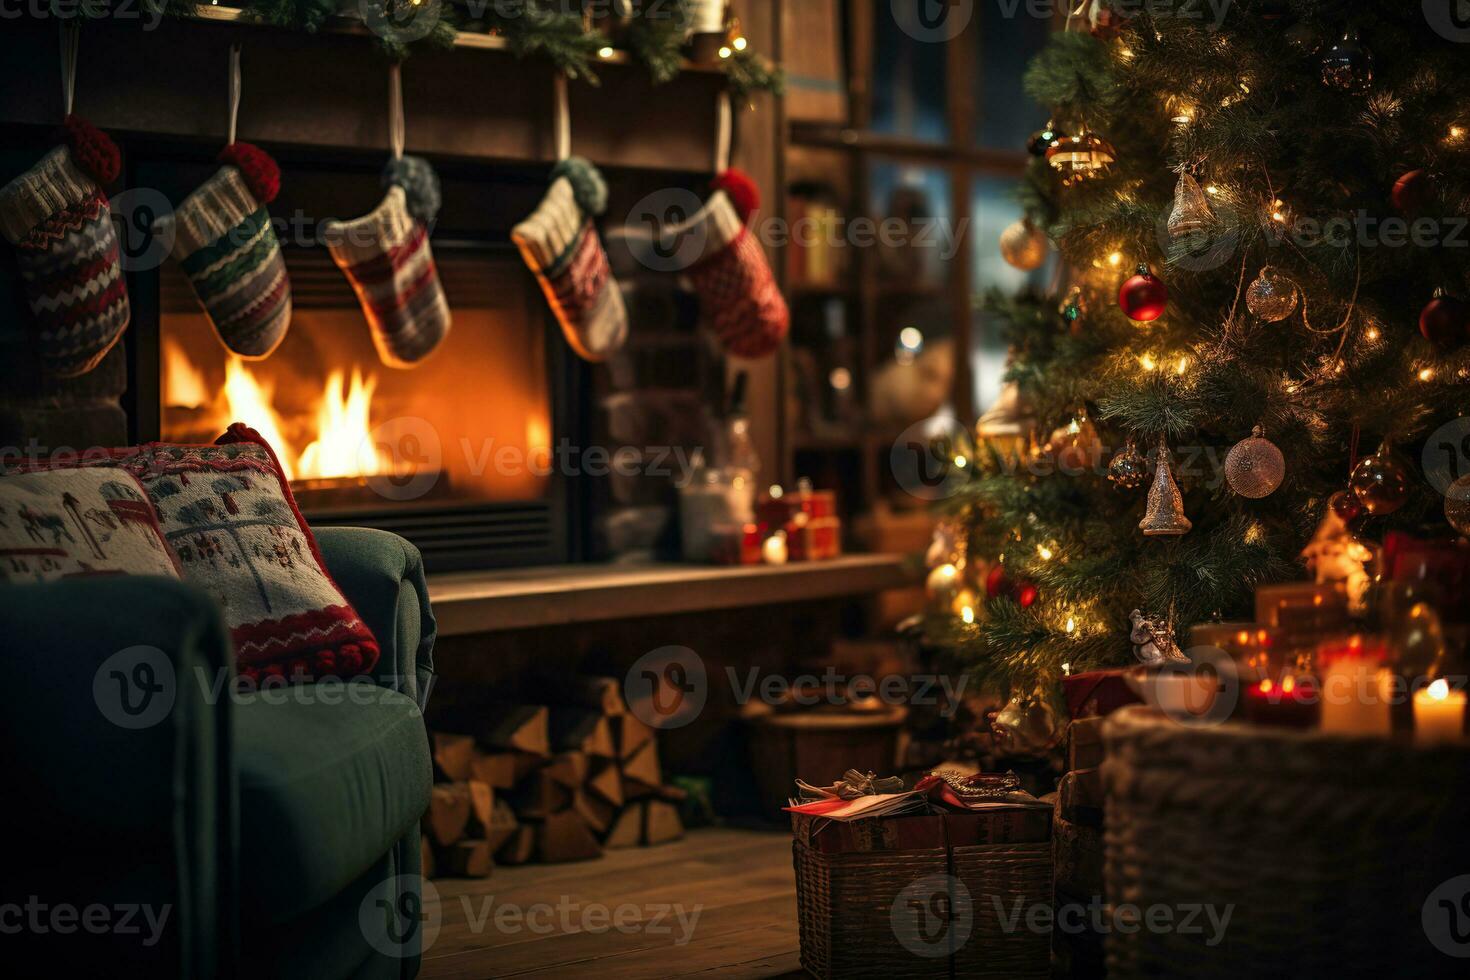 Christmas stockings beside a fireplace in front of gifts, happy time in the house christmas photo